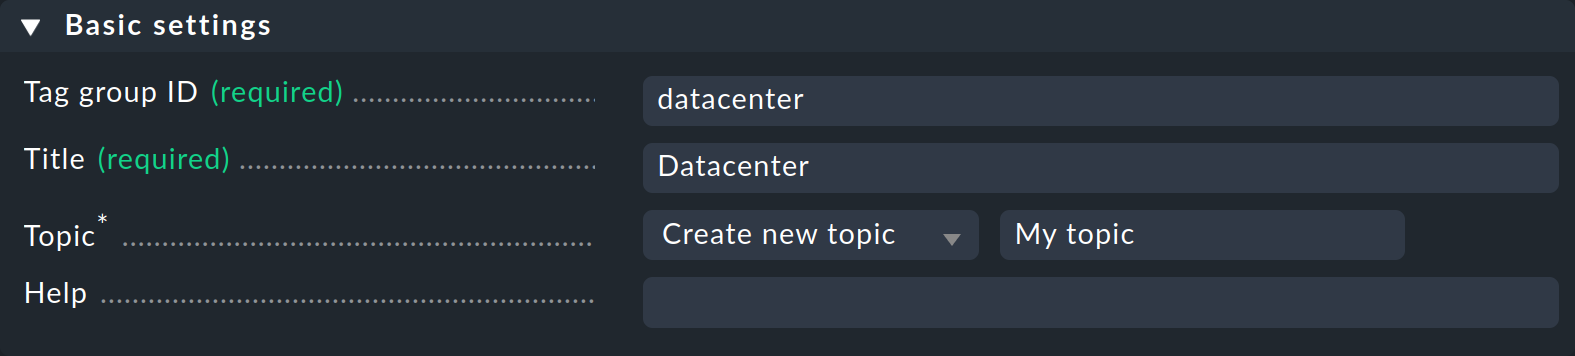 Basic settings for a tag group.